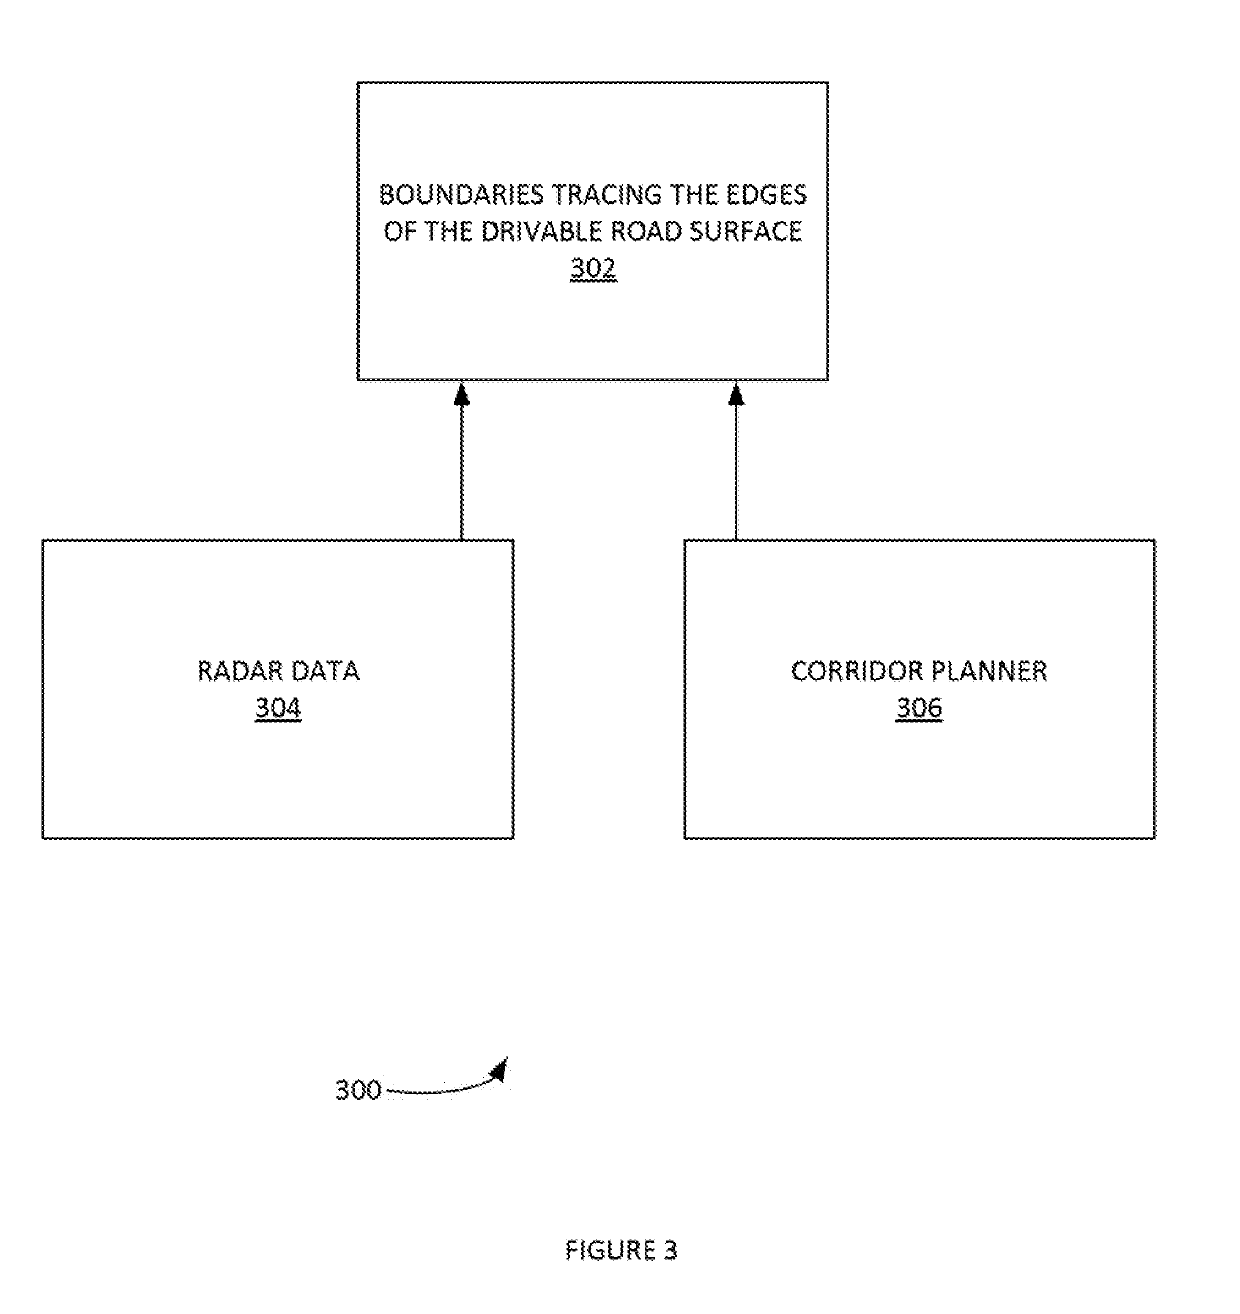 Radar-based guidance and wireless control for automated vehicle platooning and lane keeping on an automated highway system